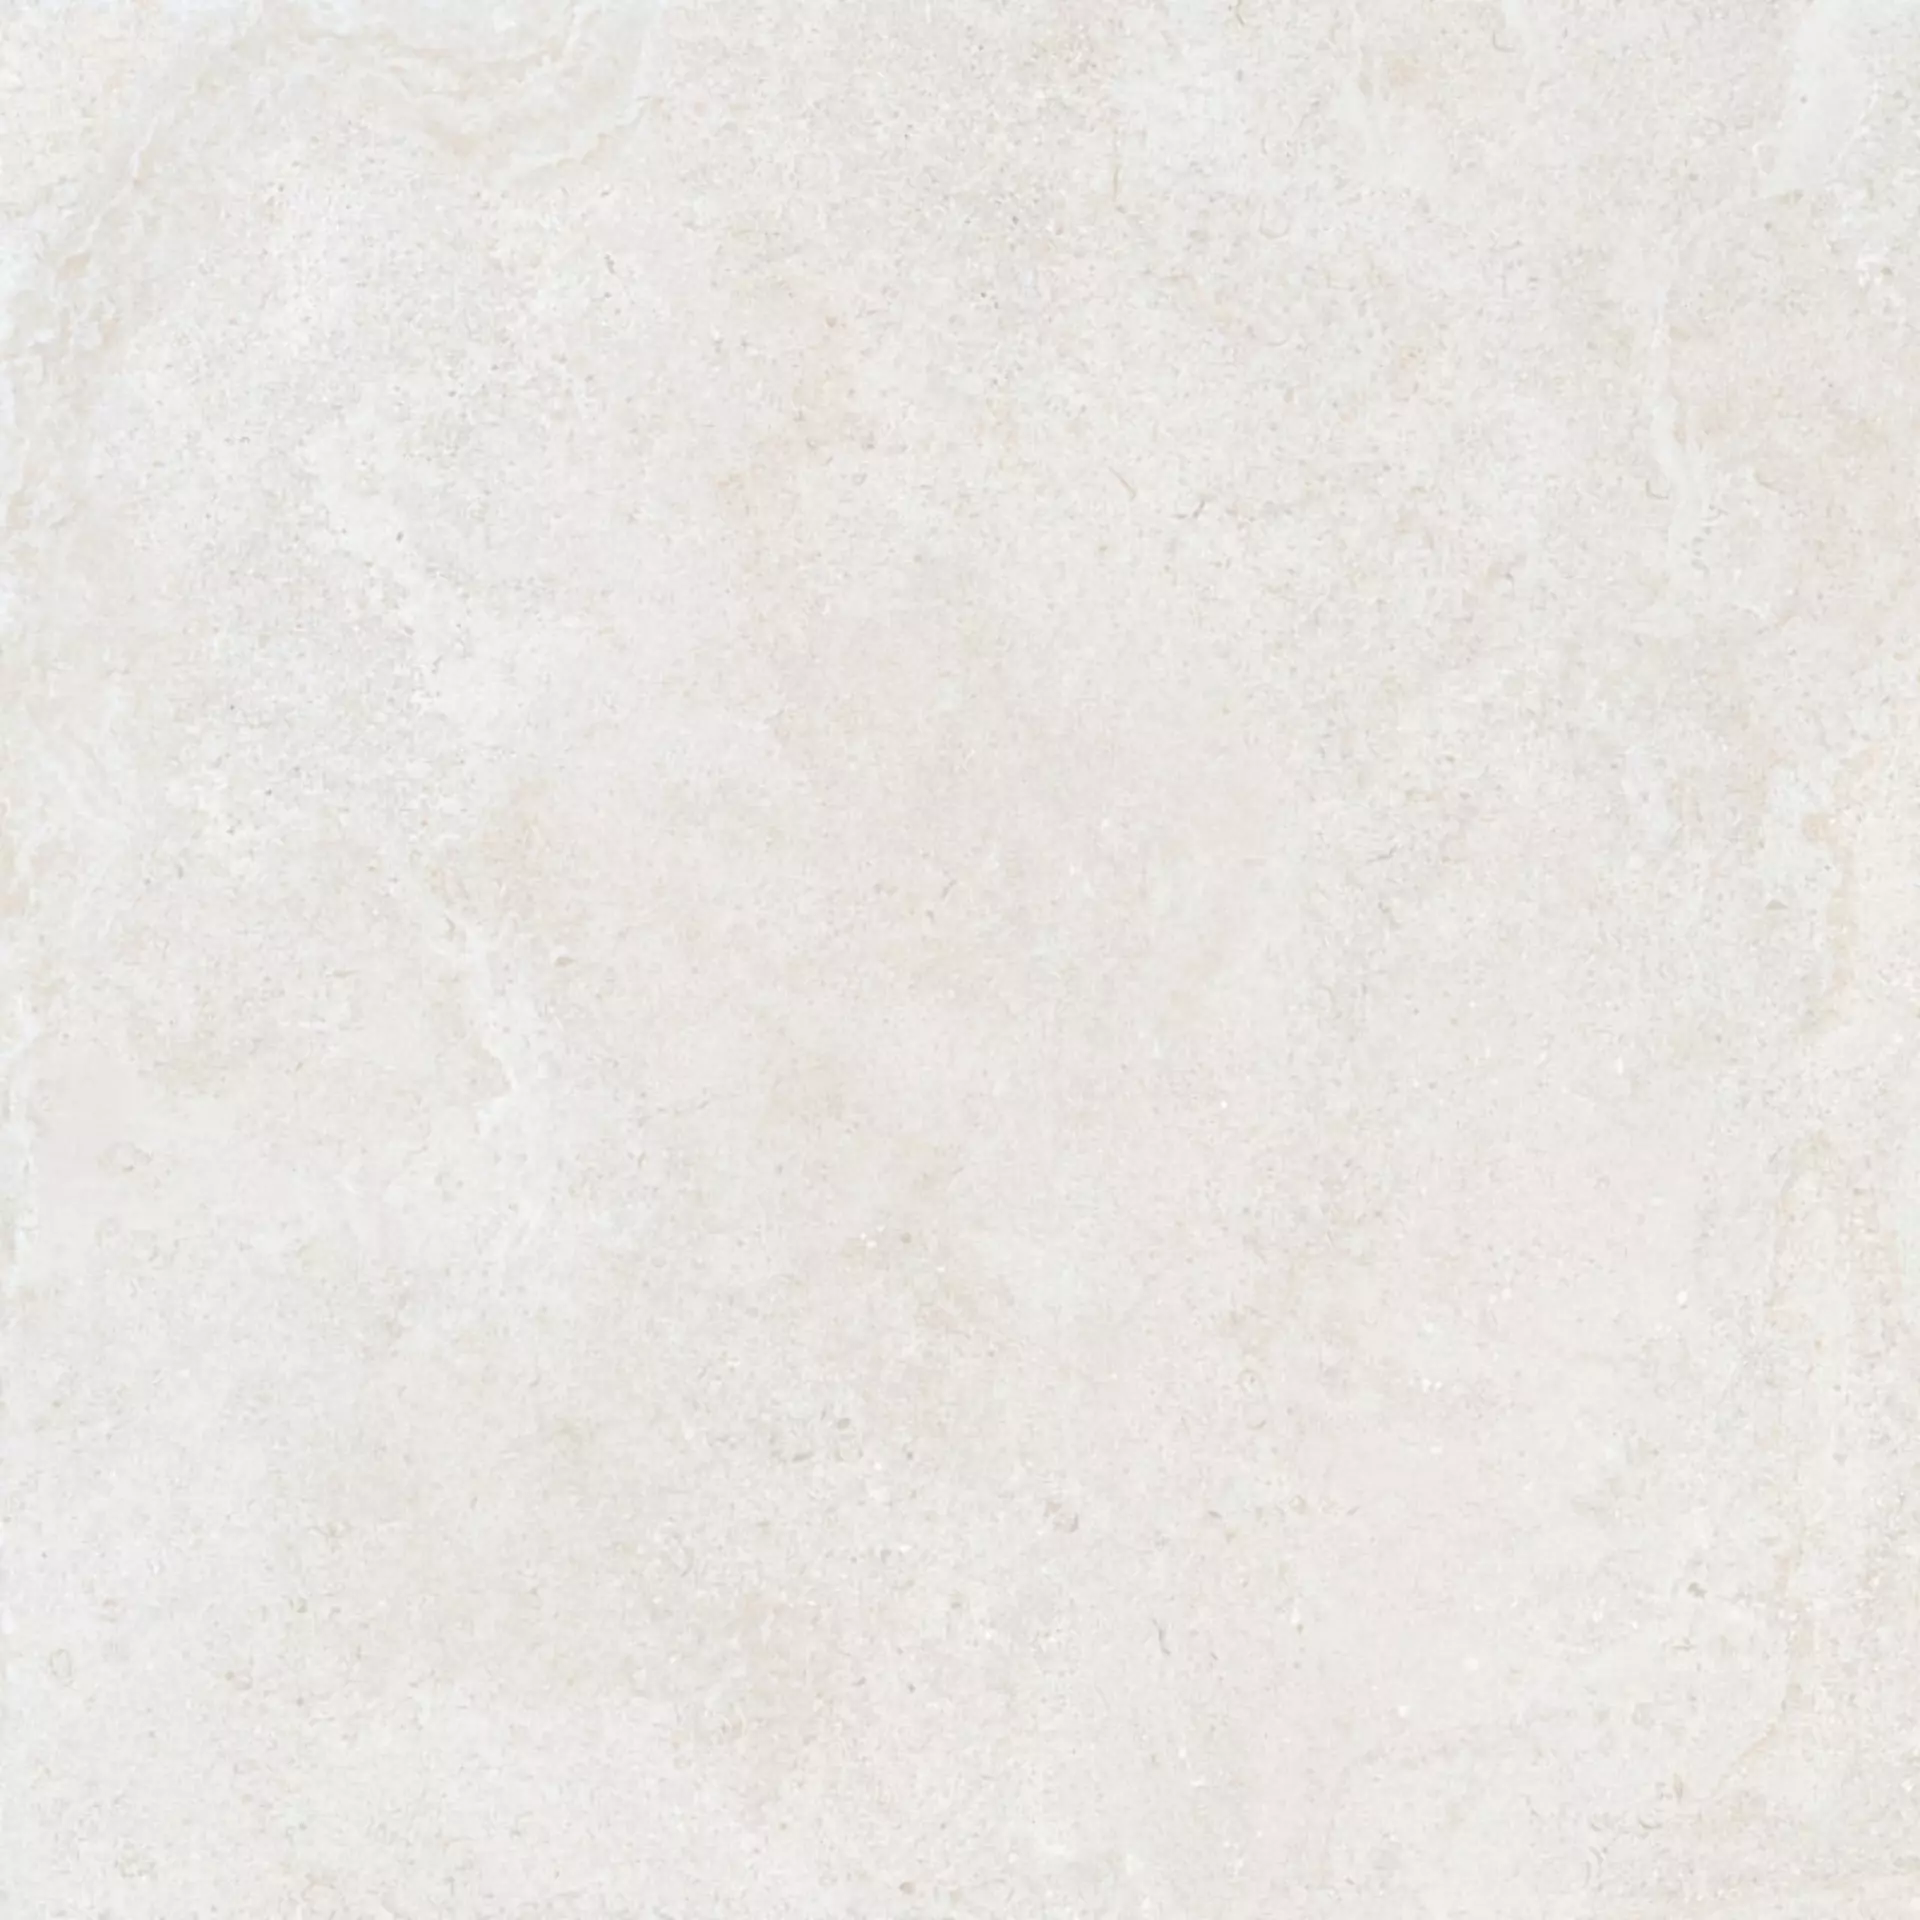 Keope Brystone White Strutturato 44593548 60x60cm rectified 9mm